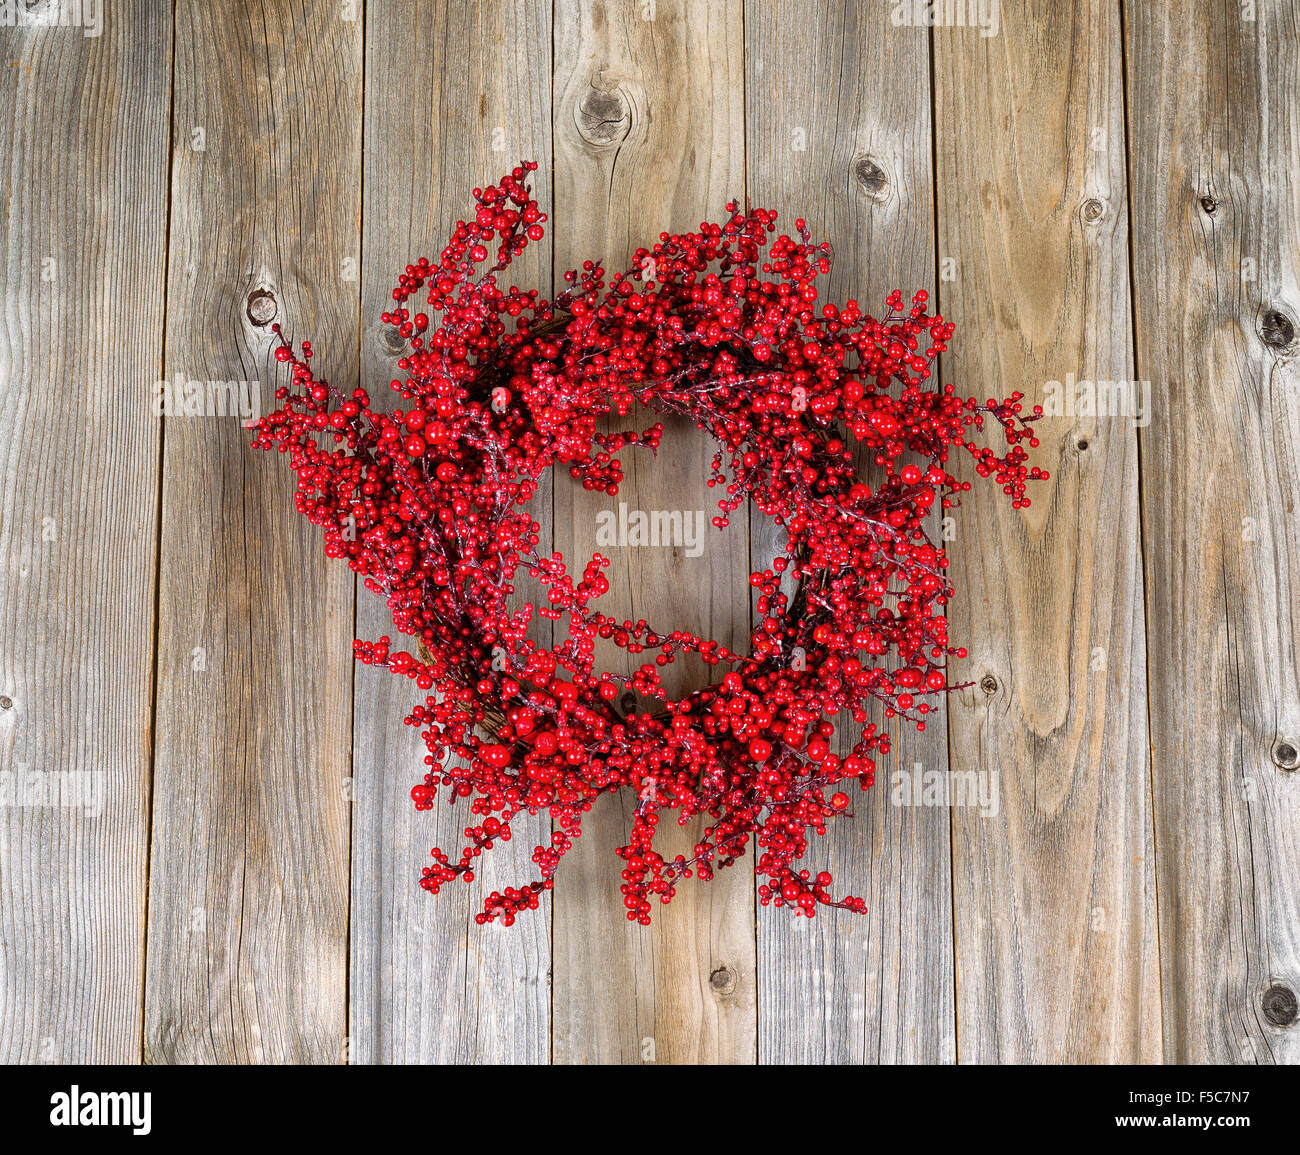 Red holly berry wreath on rustic wood. Boards in vertical layout. Stock Photo